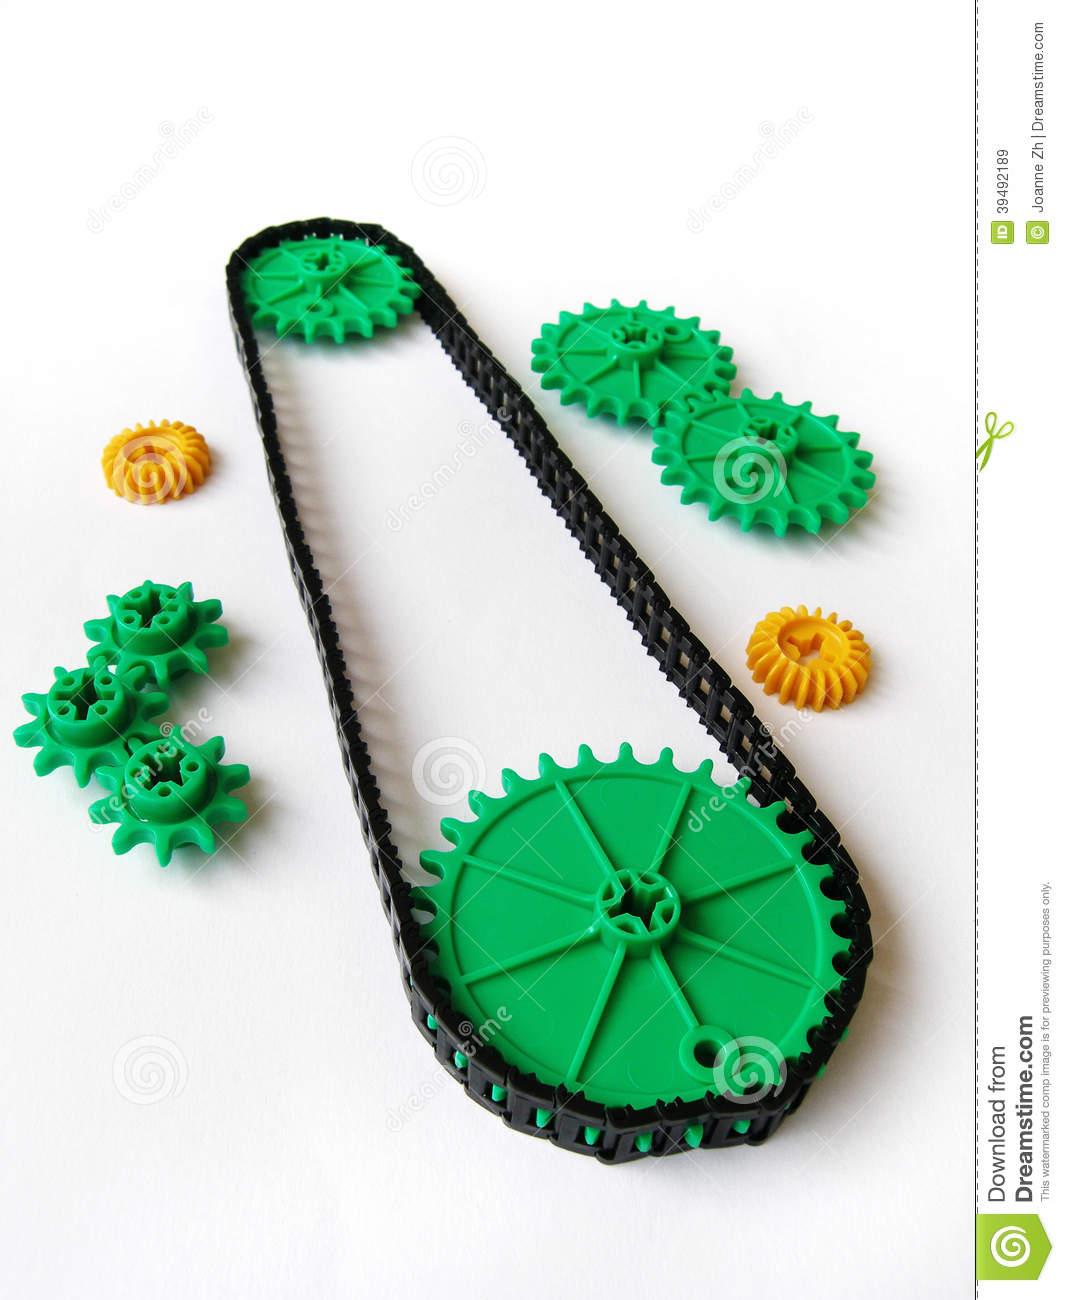 Photograph Showing Some Cogs And Gears Arranged Together With A Belt